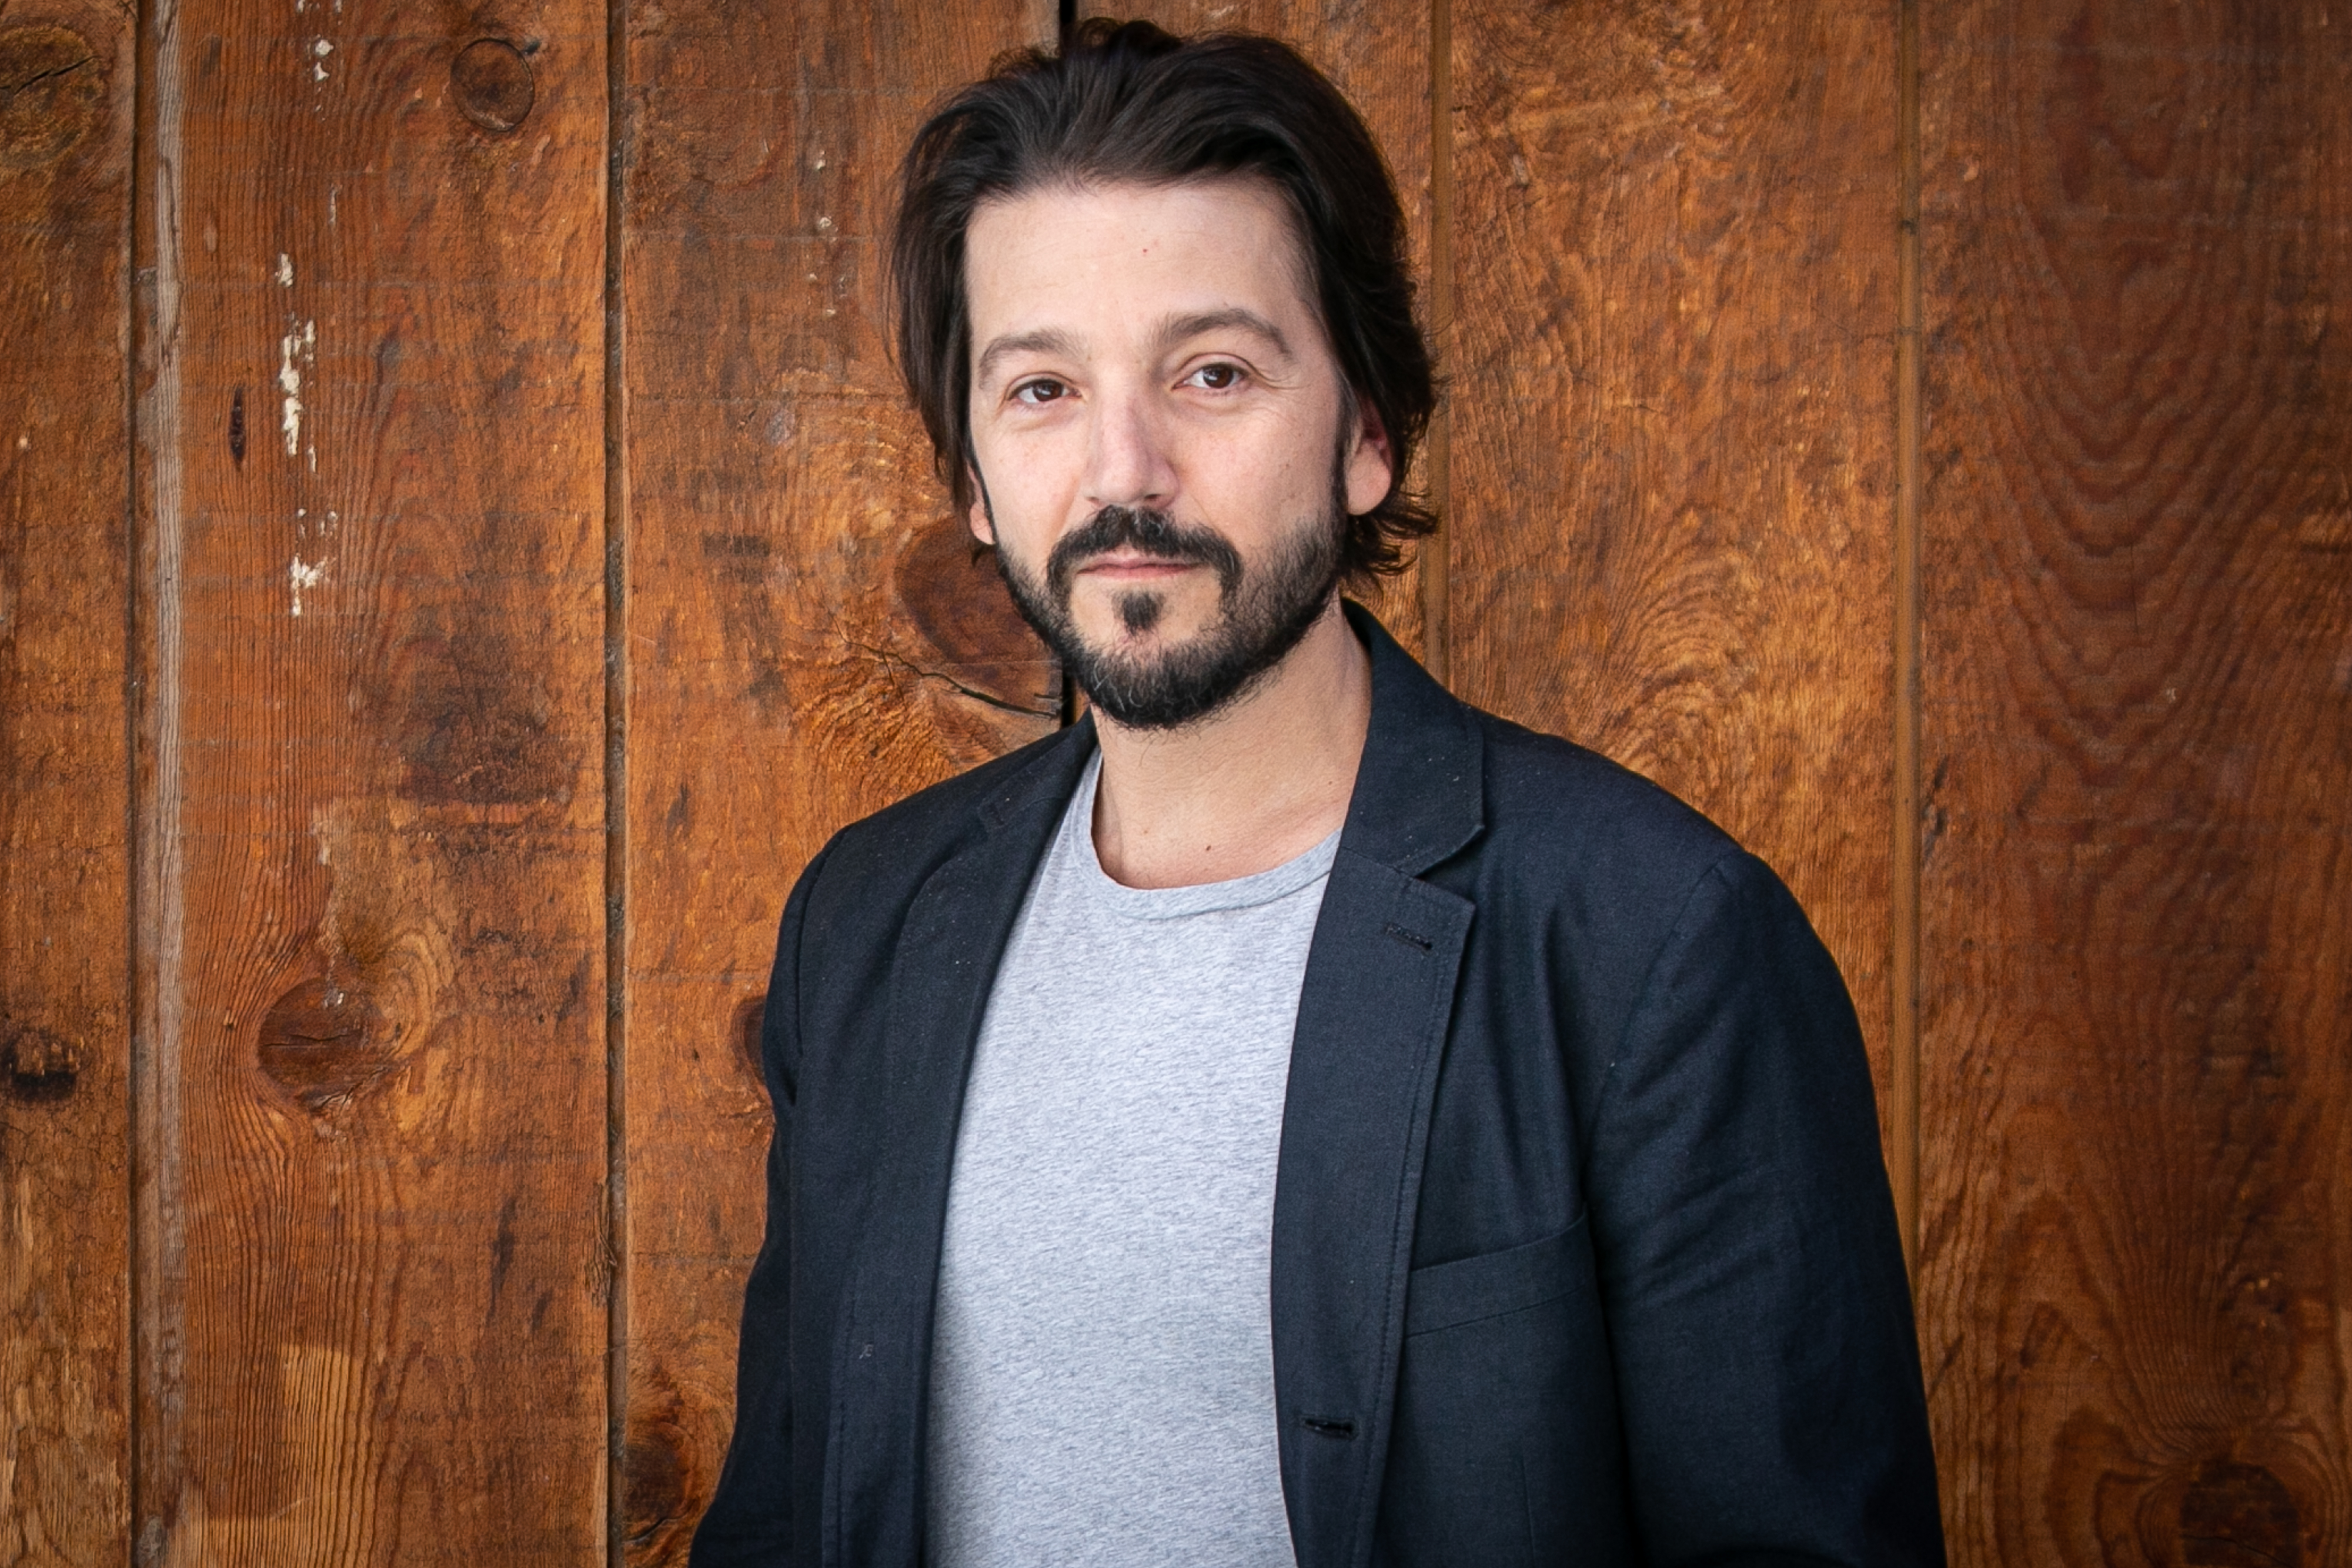 Cassian Andor actor Diego Luna poses for a photo in Spain